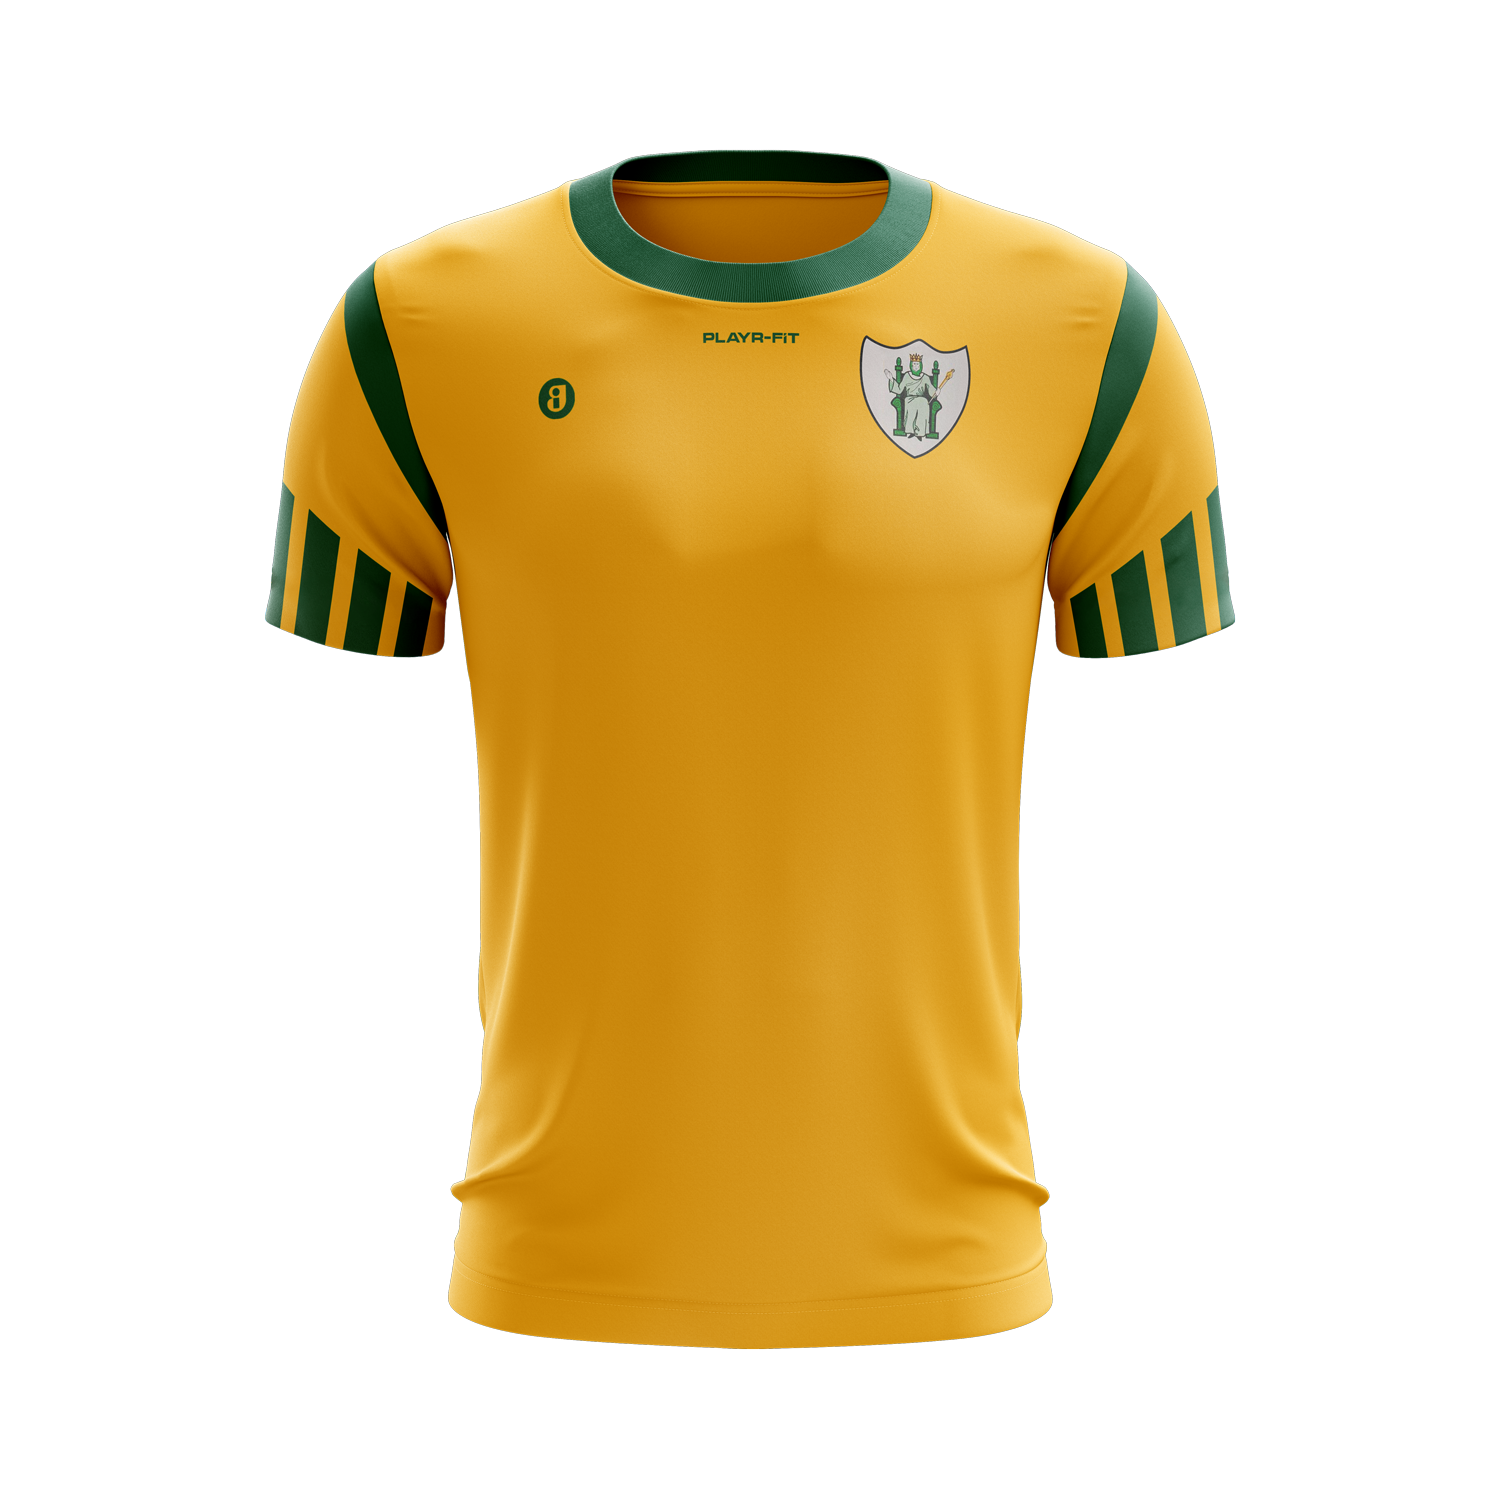 County Retro Meath Kid's Jersey - Away - PLAYR-FIT - Ireland & UK